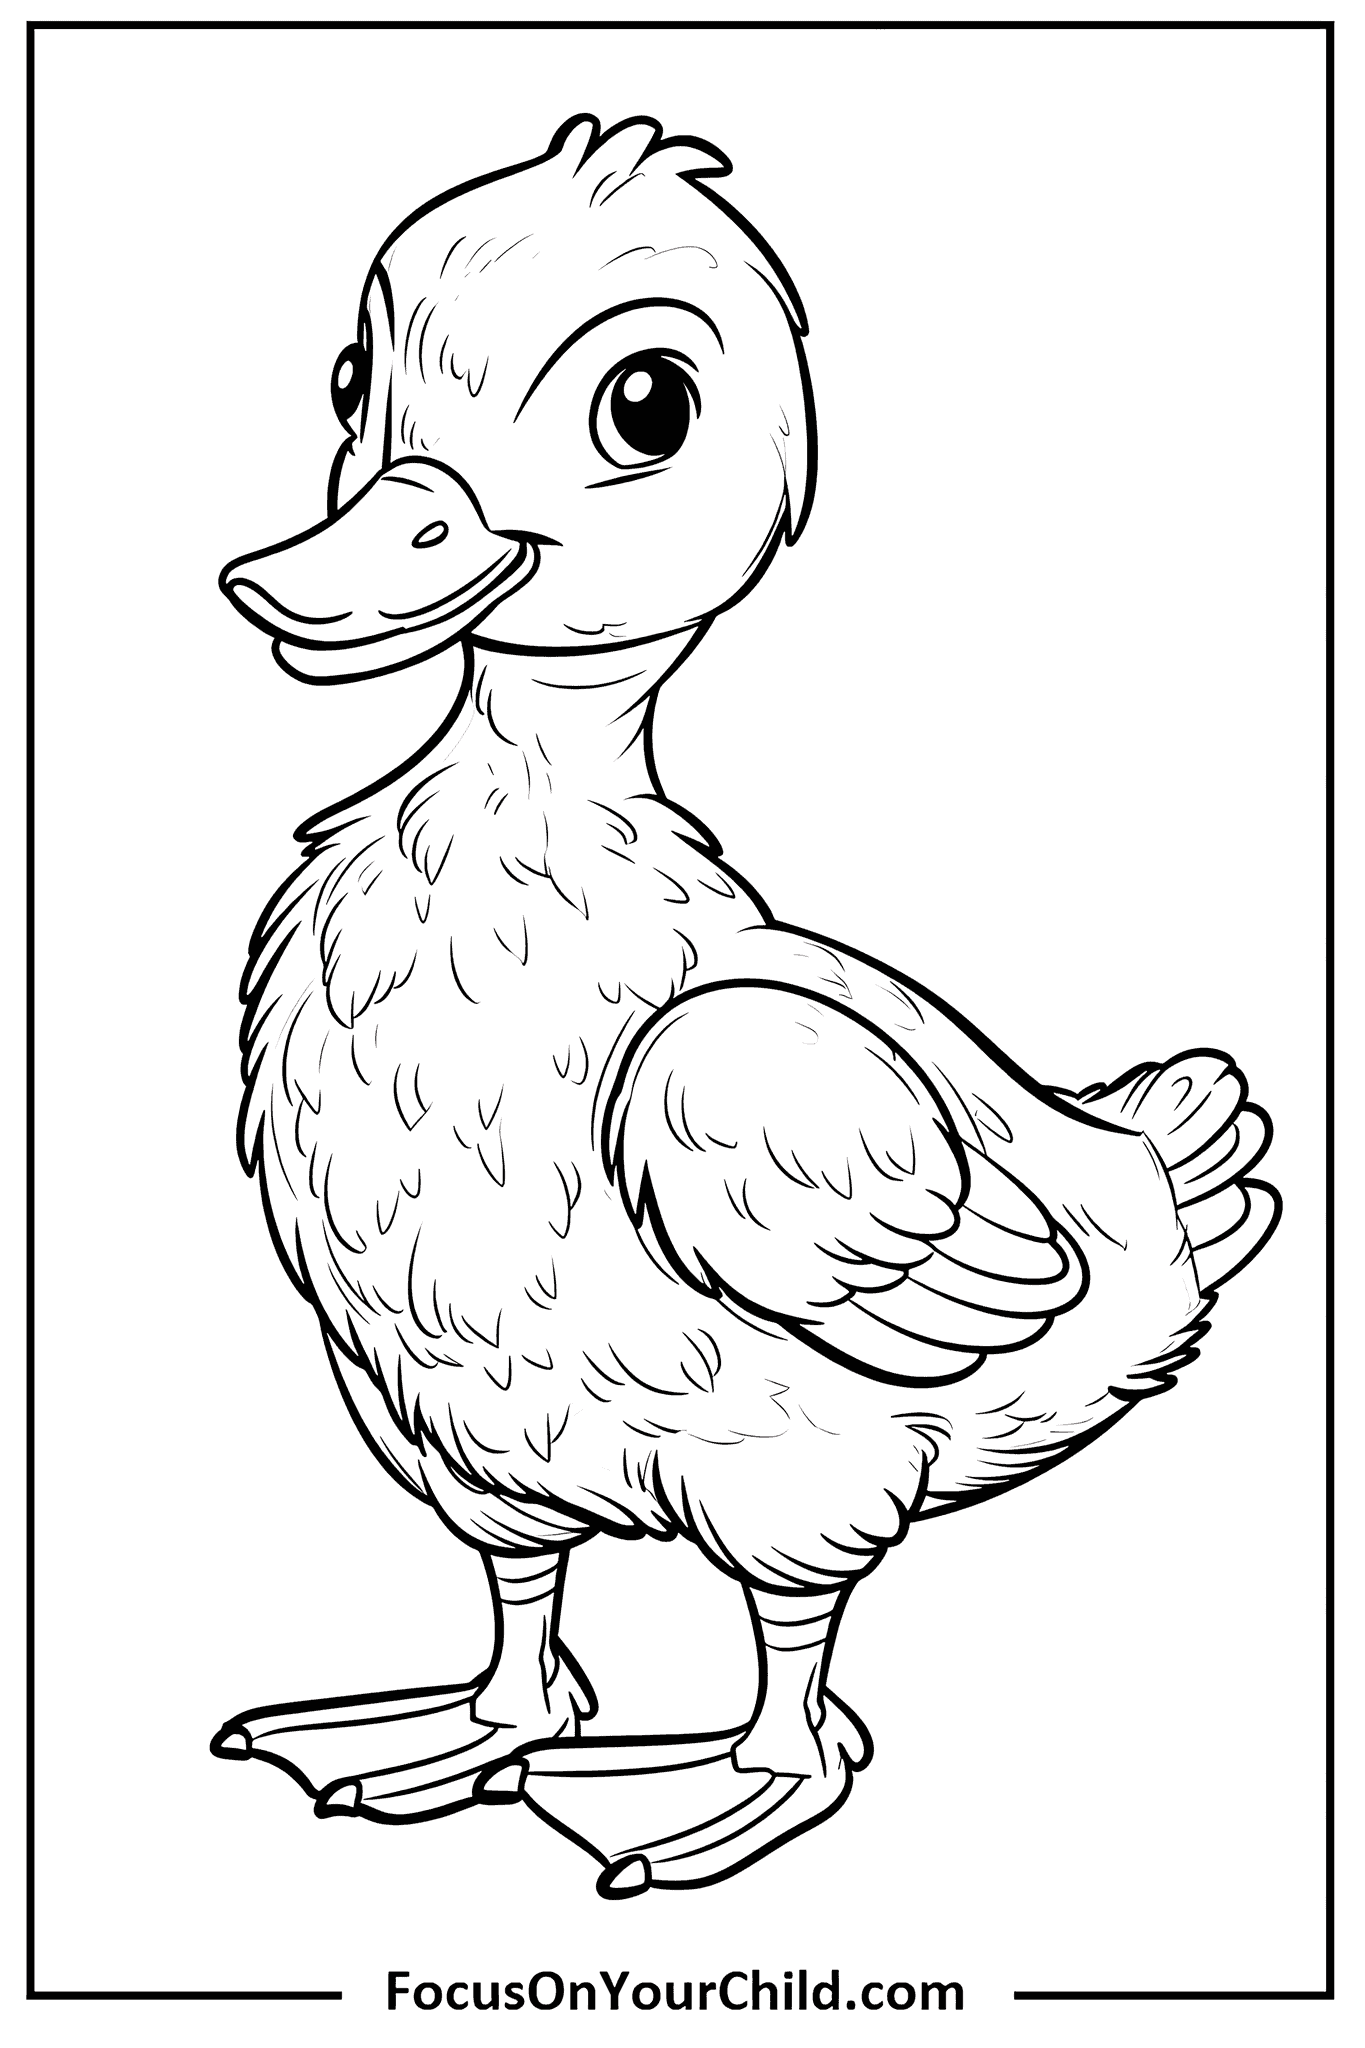 Cartoon duck coloring page for kids on FocusOnYourChild.com.